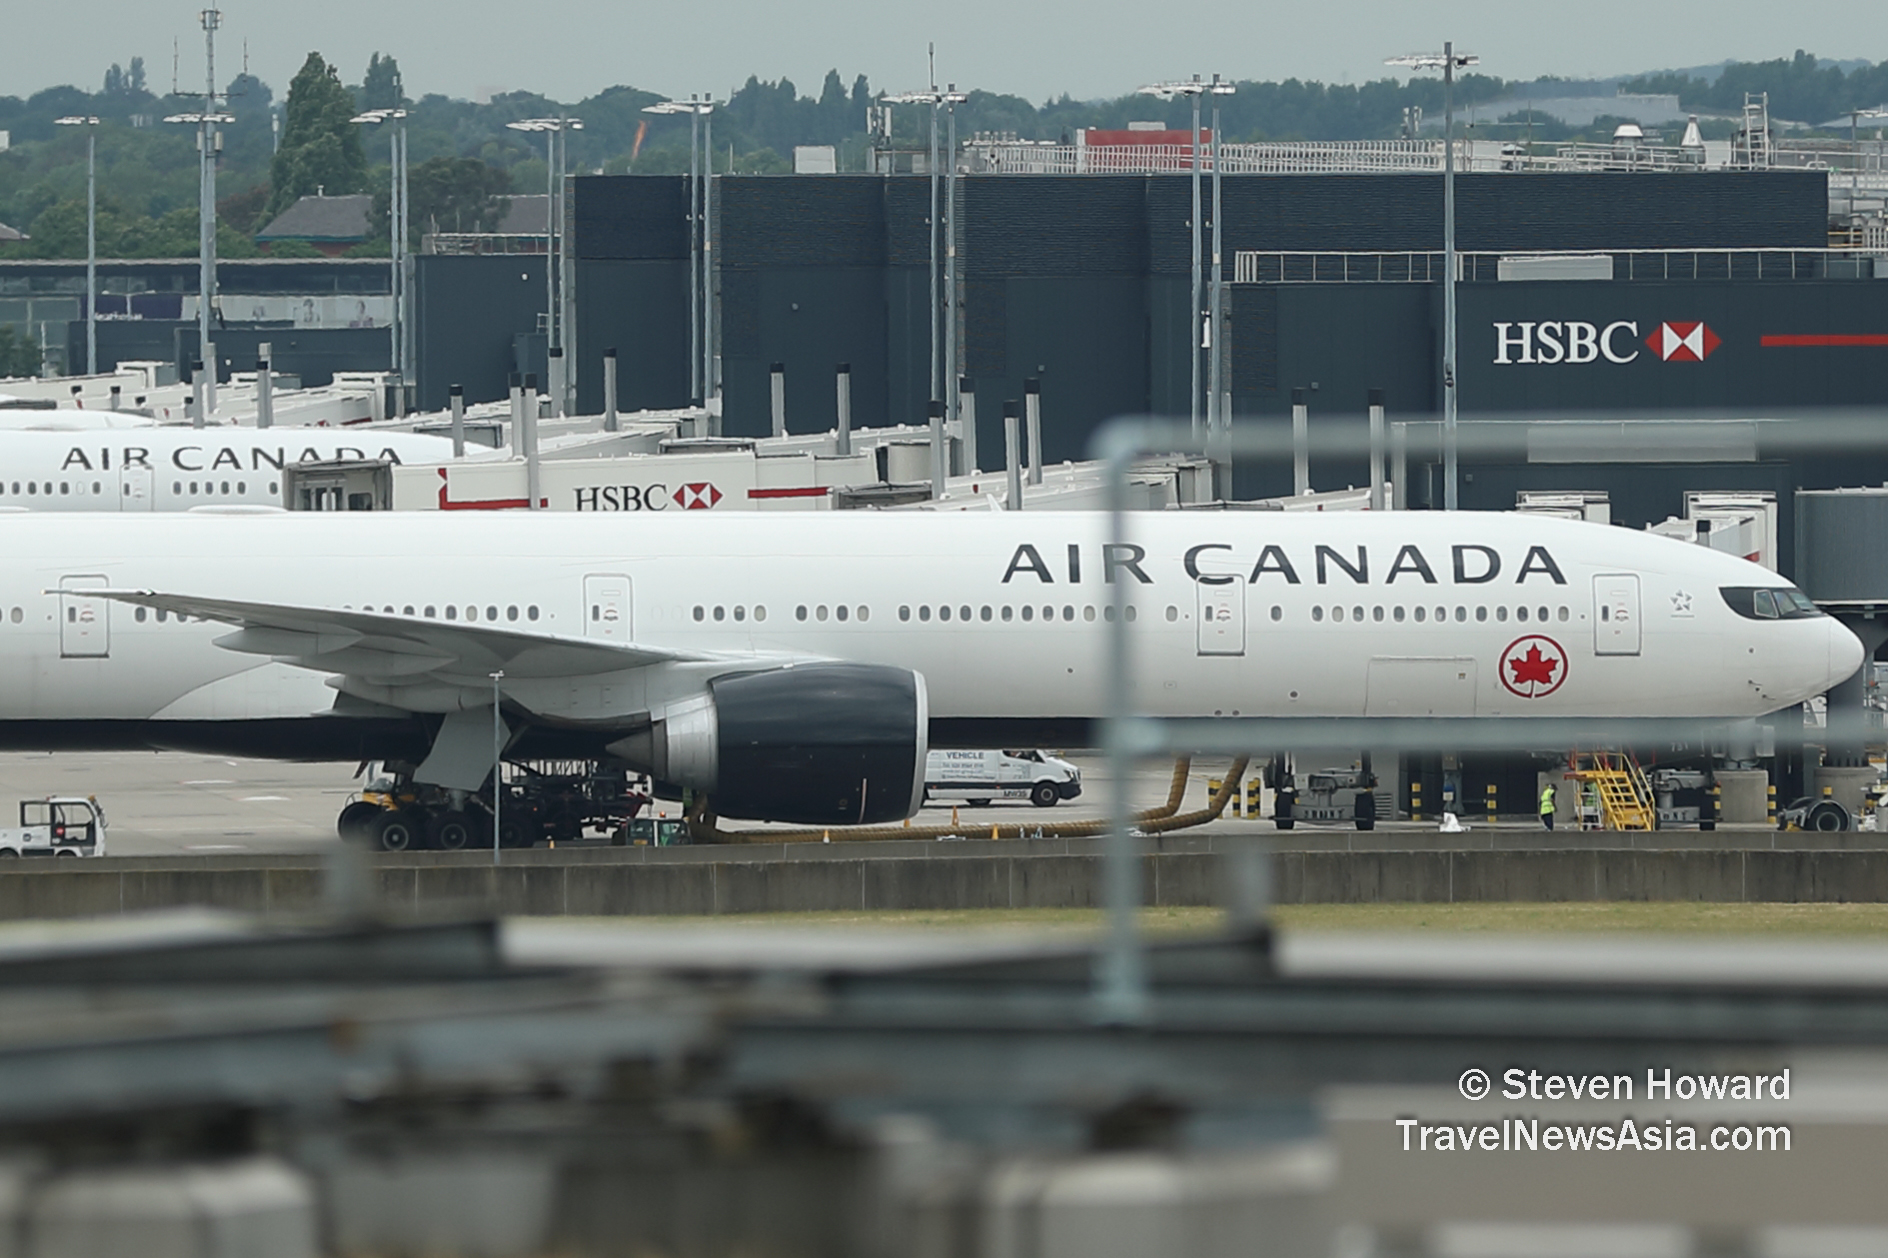 Air Canada Boeing 777-300ER reg: C-FITL. Picture by Steven Howard of TravelNewsAsia.com Click to enlarge.